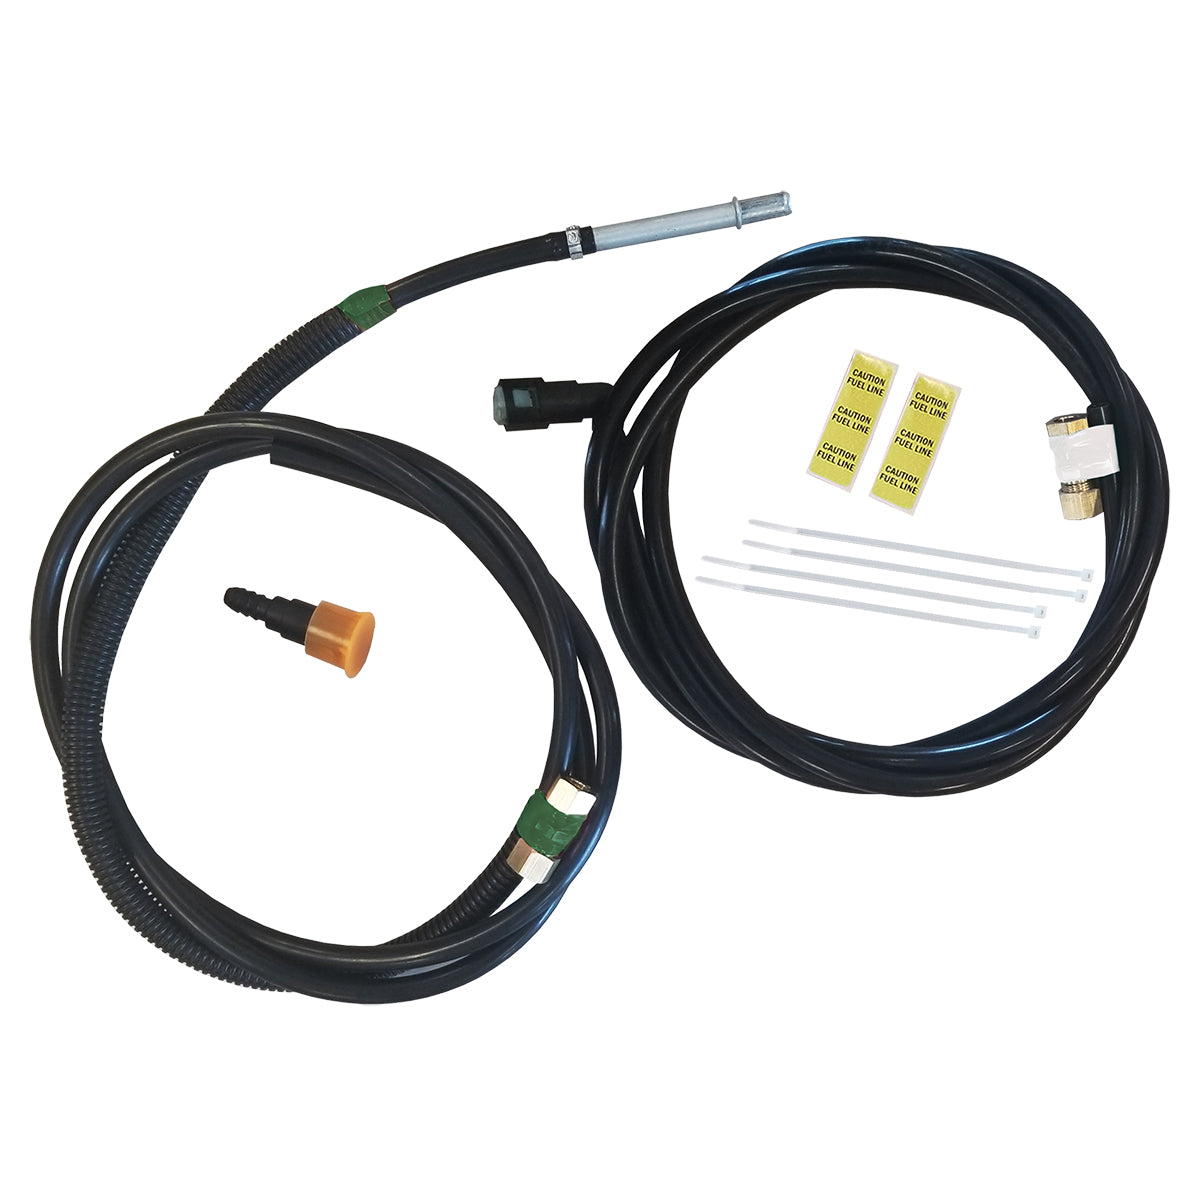 2006-11 Chevrolet HHR Nylon Supply & Vapor Fuel Line Kit From Fuel Tank To  Mid Section Of Car